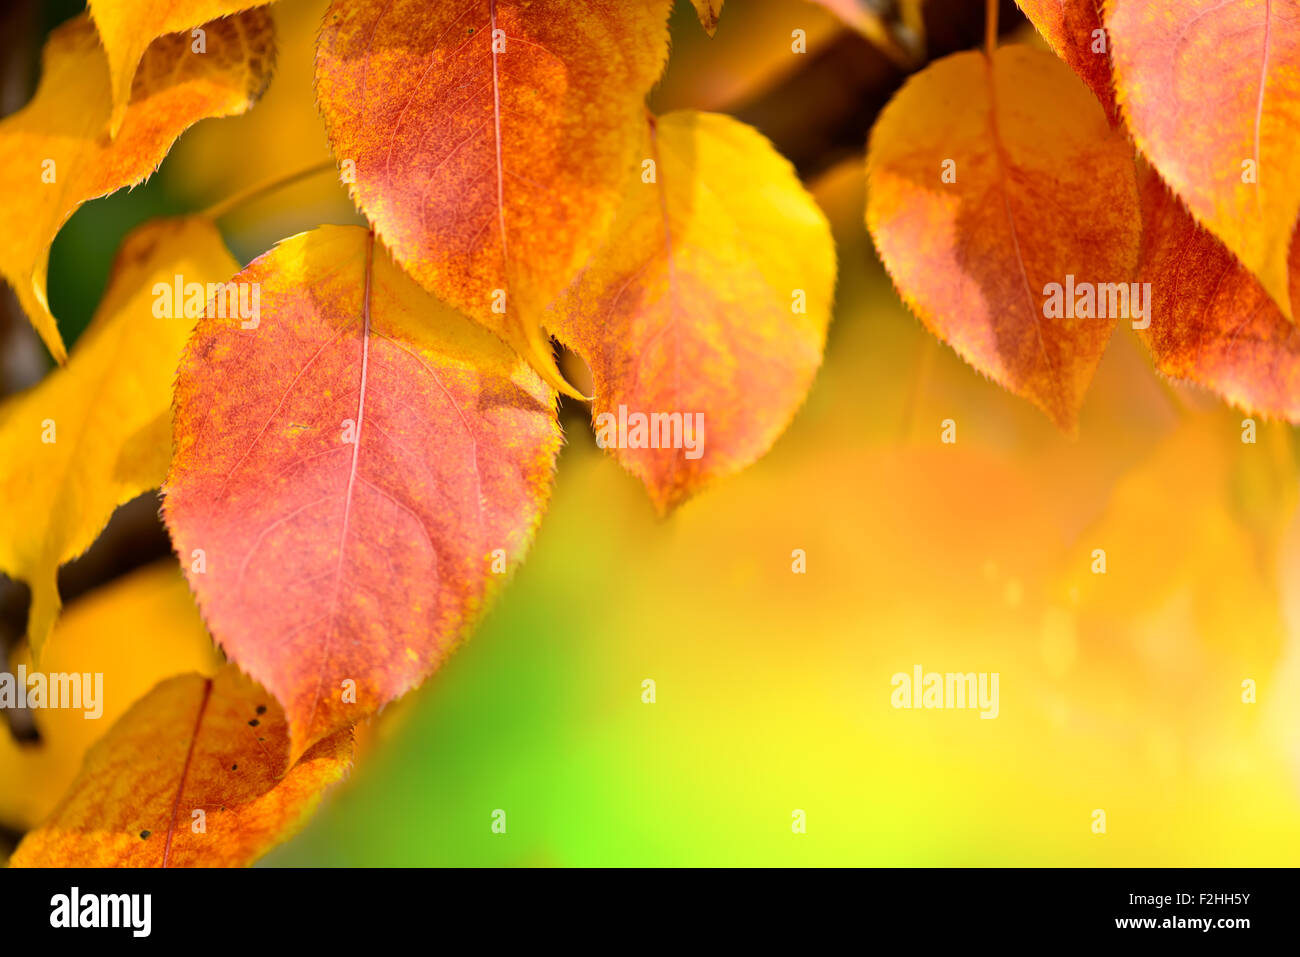 fall autumn leaf background decoration with copyspace for your text Stock Photo